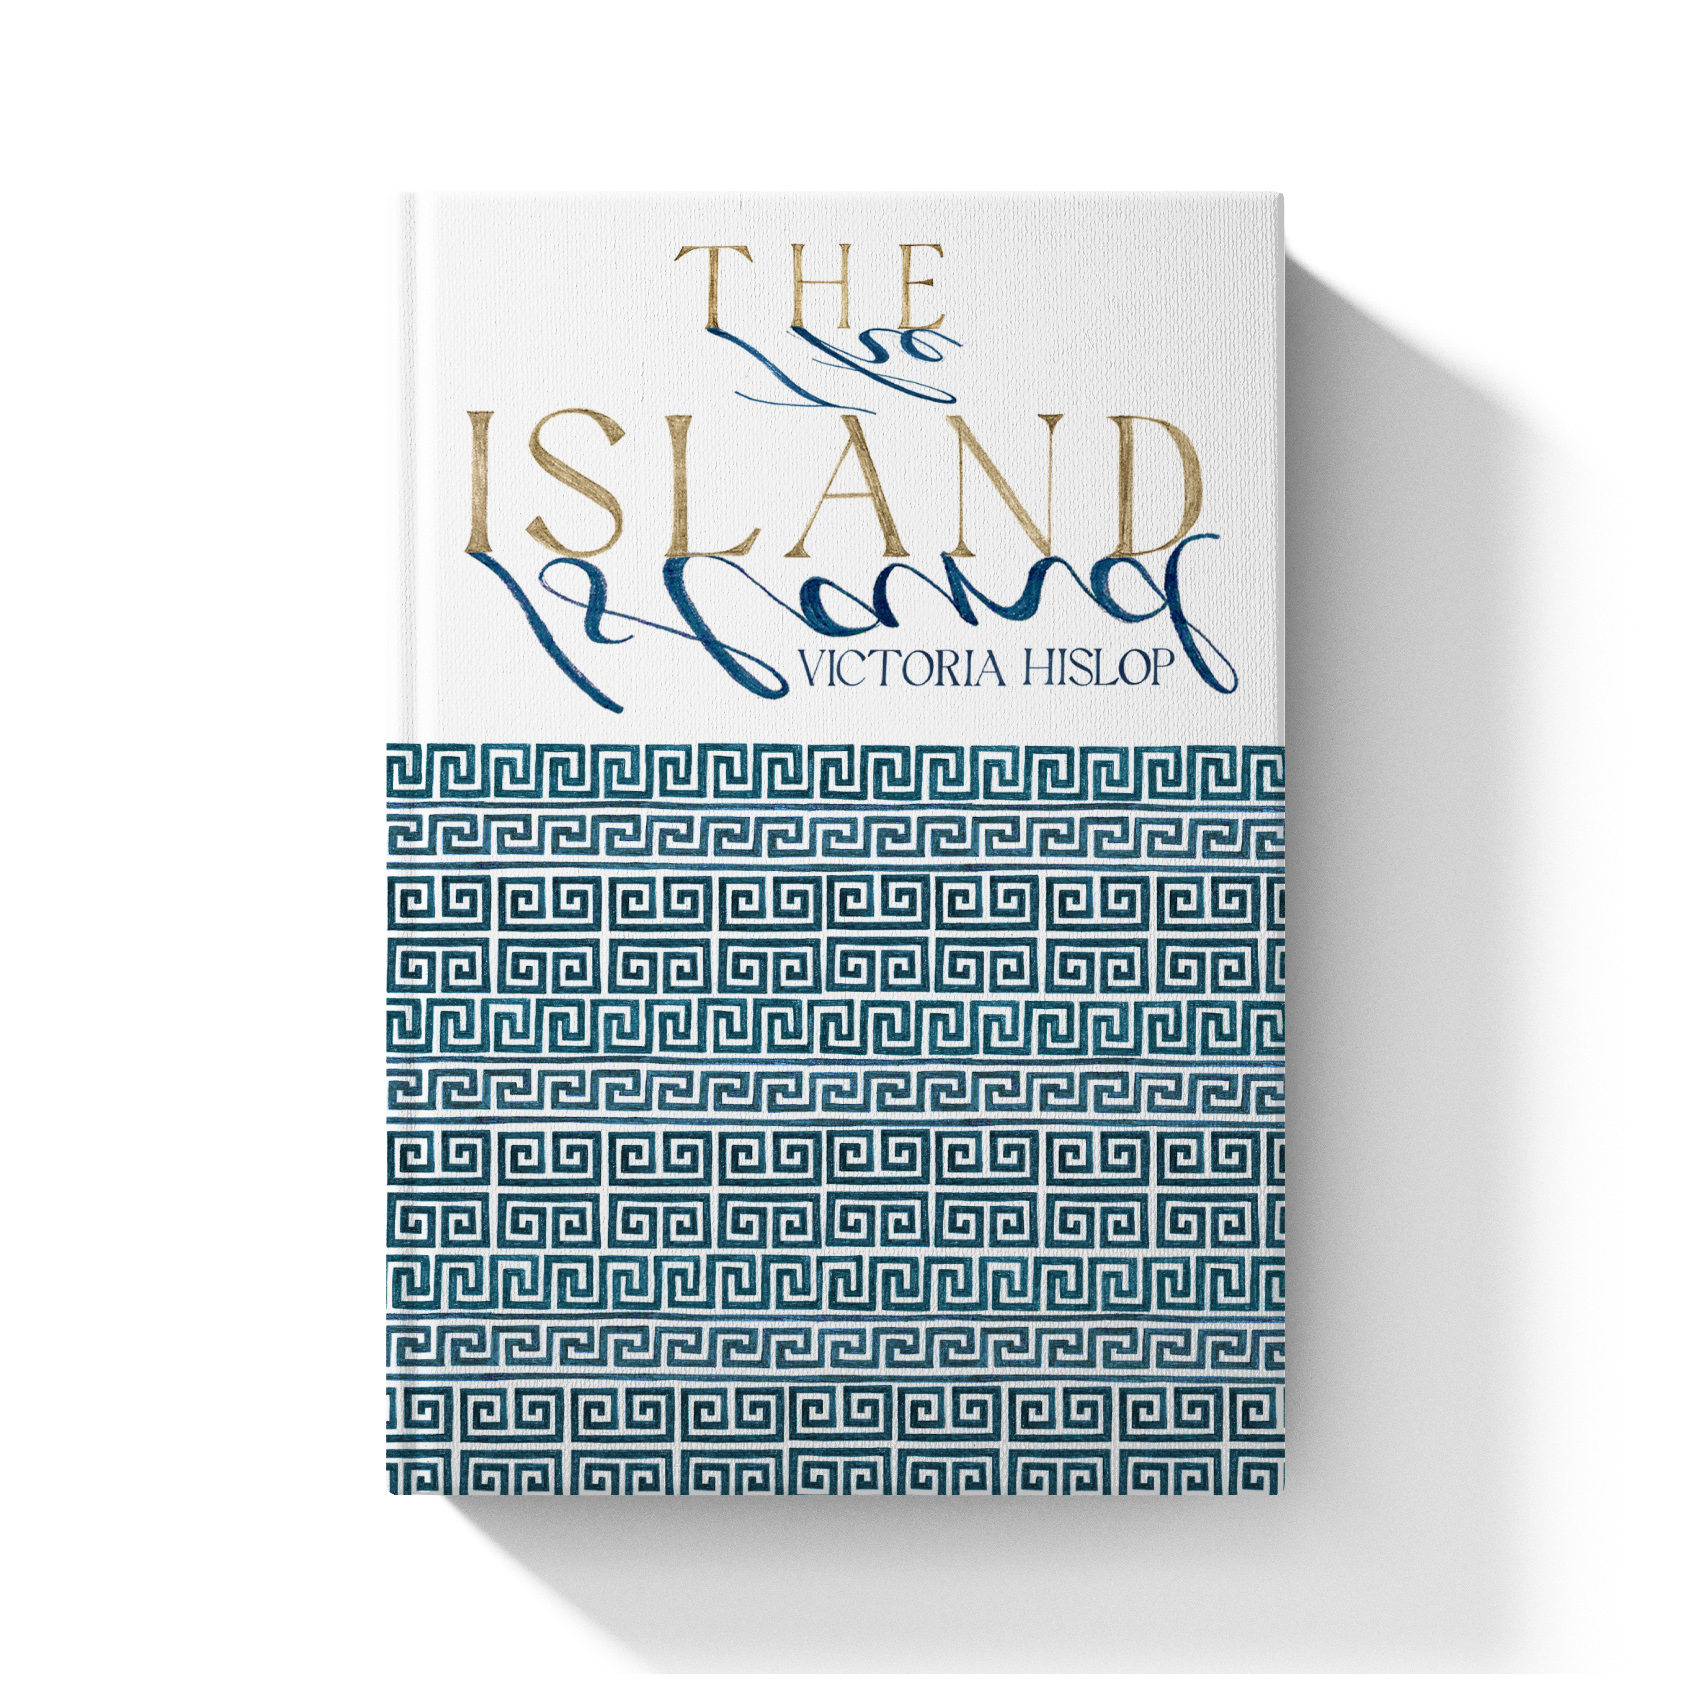 A speculative book cover design inspired by The Island.